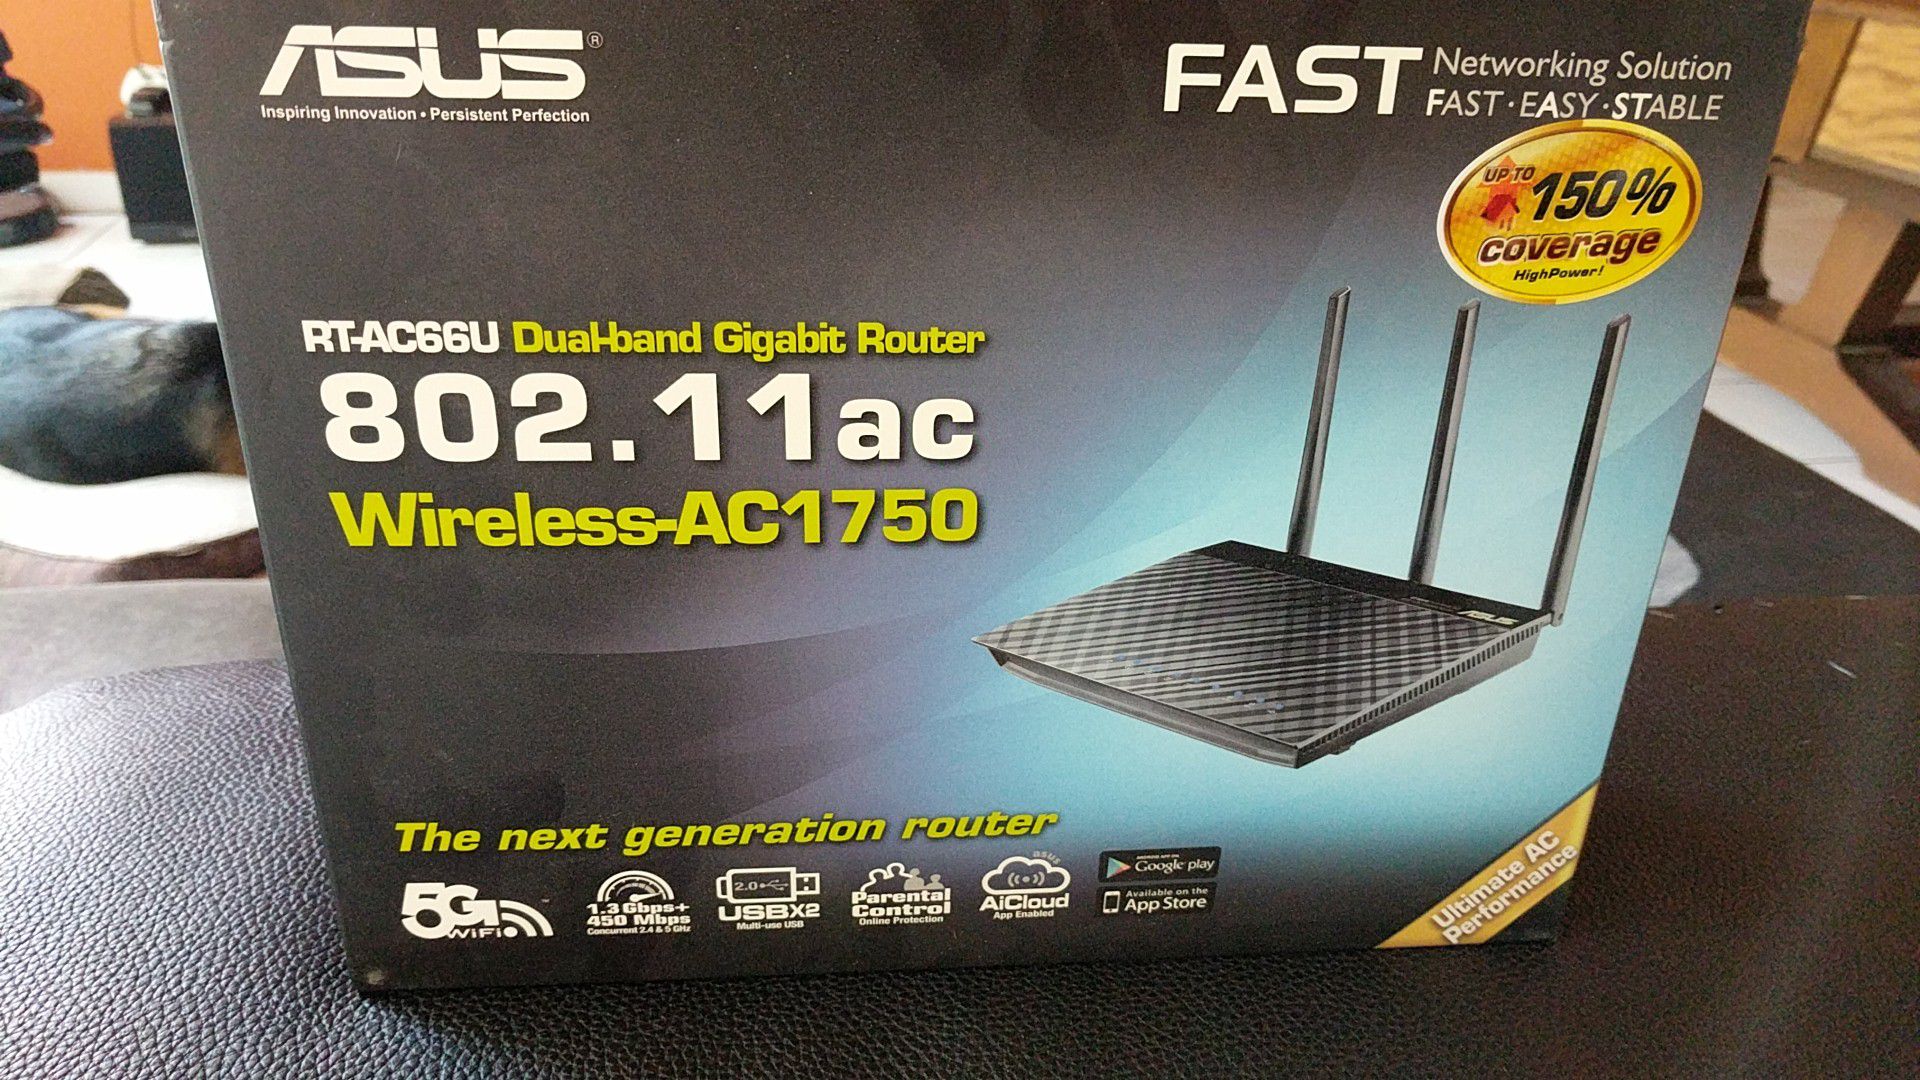 Asus rt-ac66u router wifi